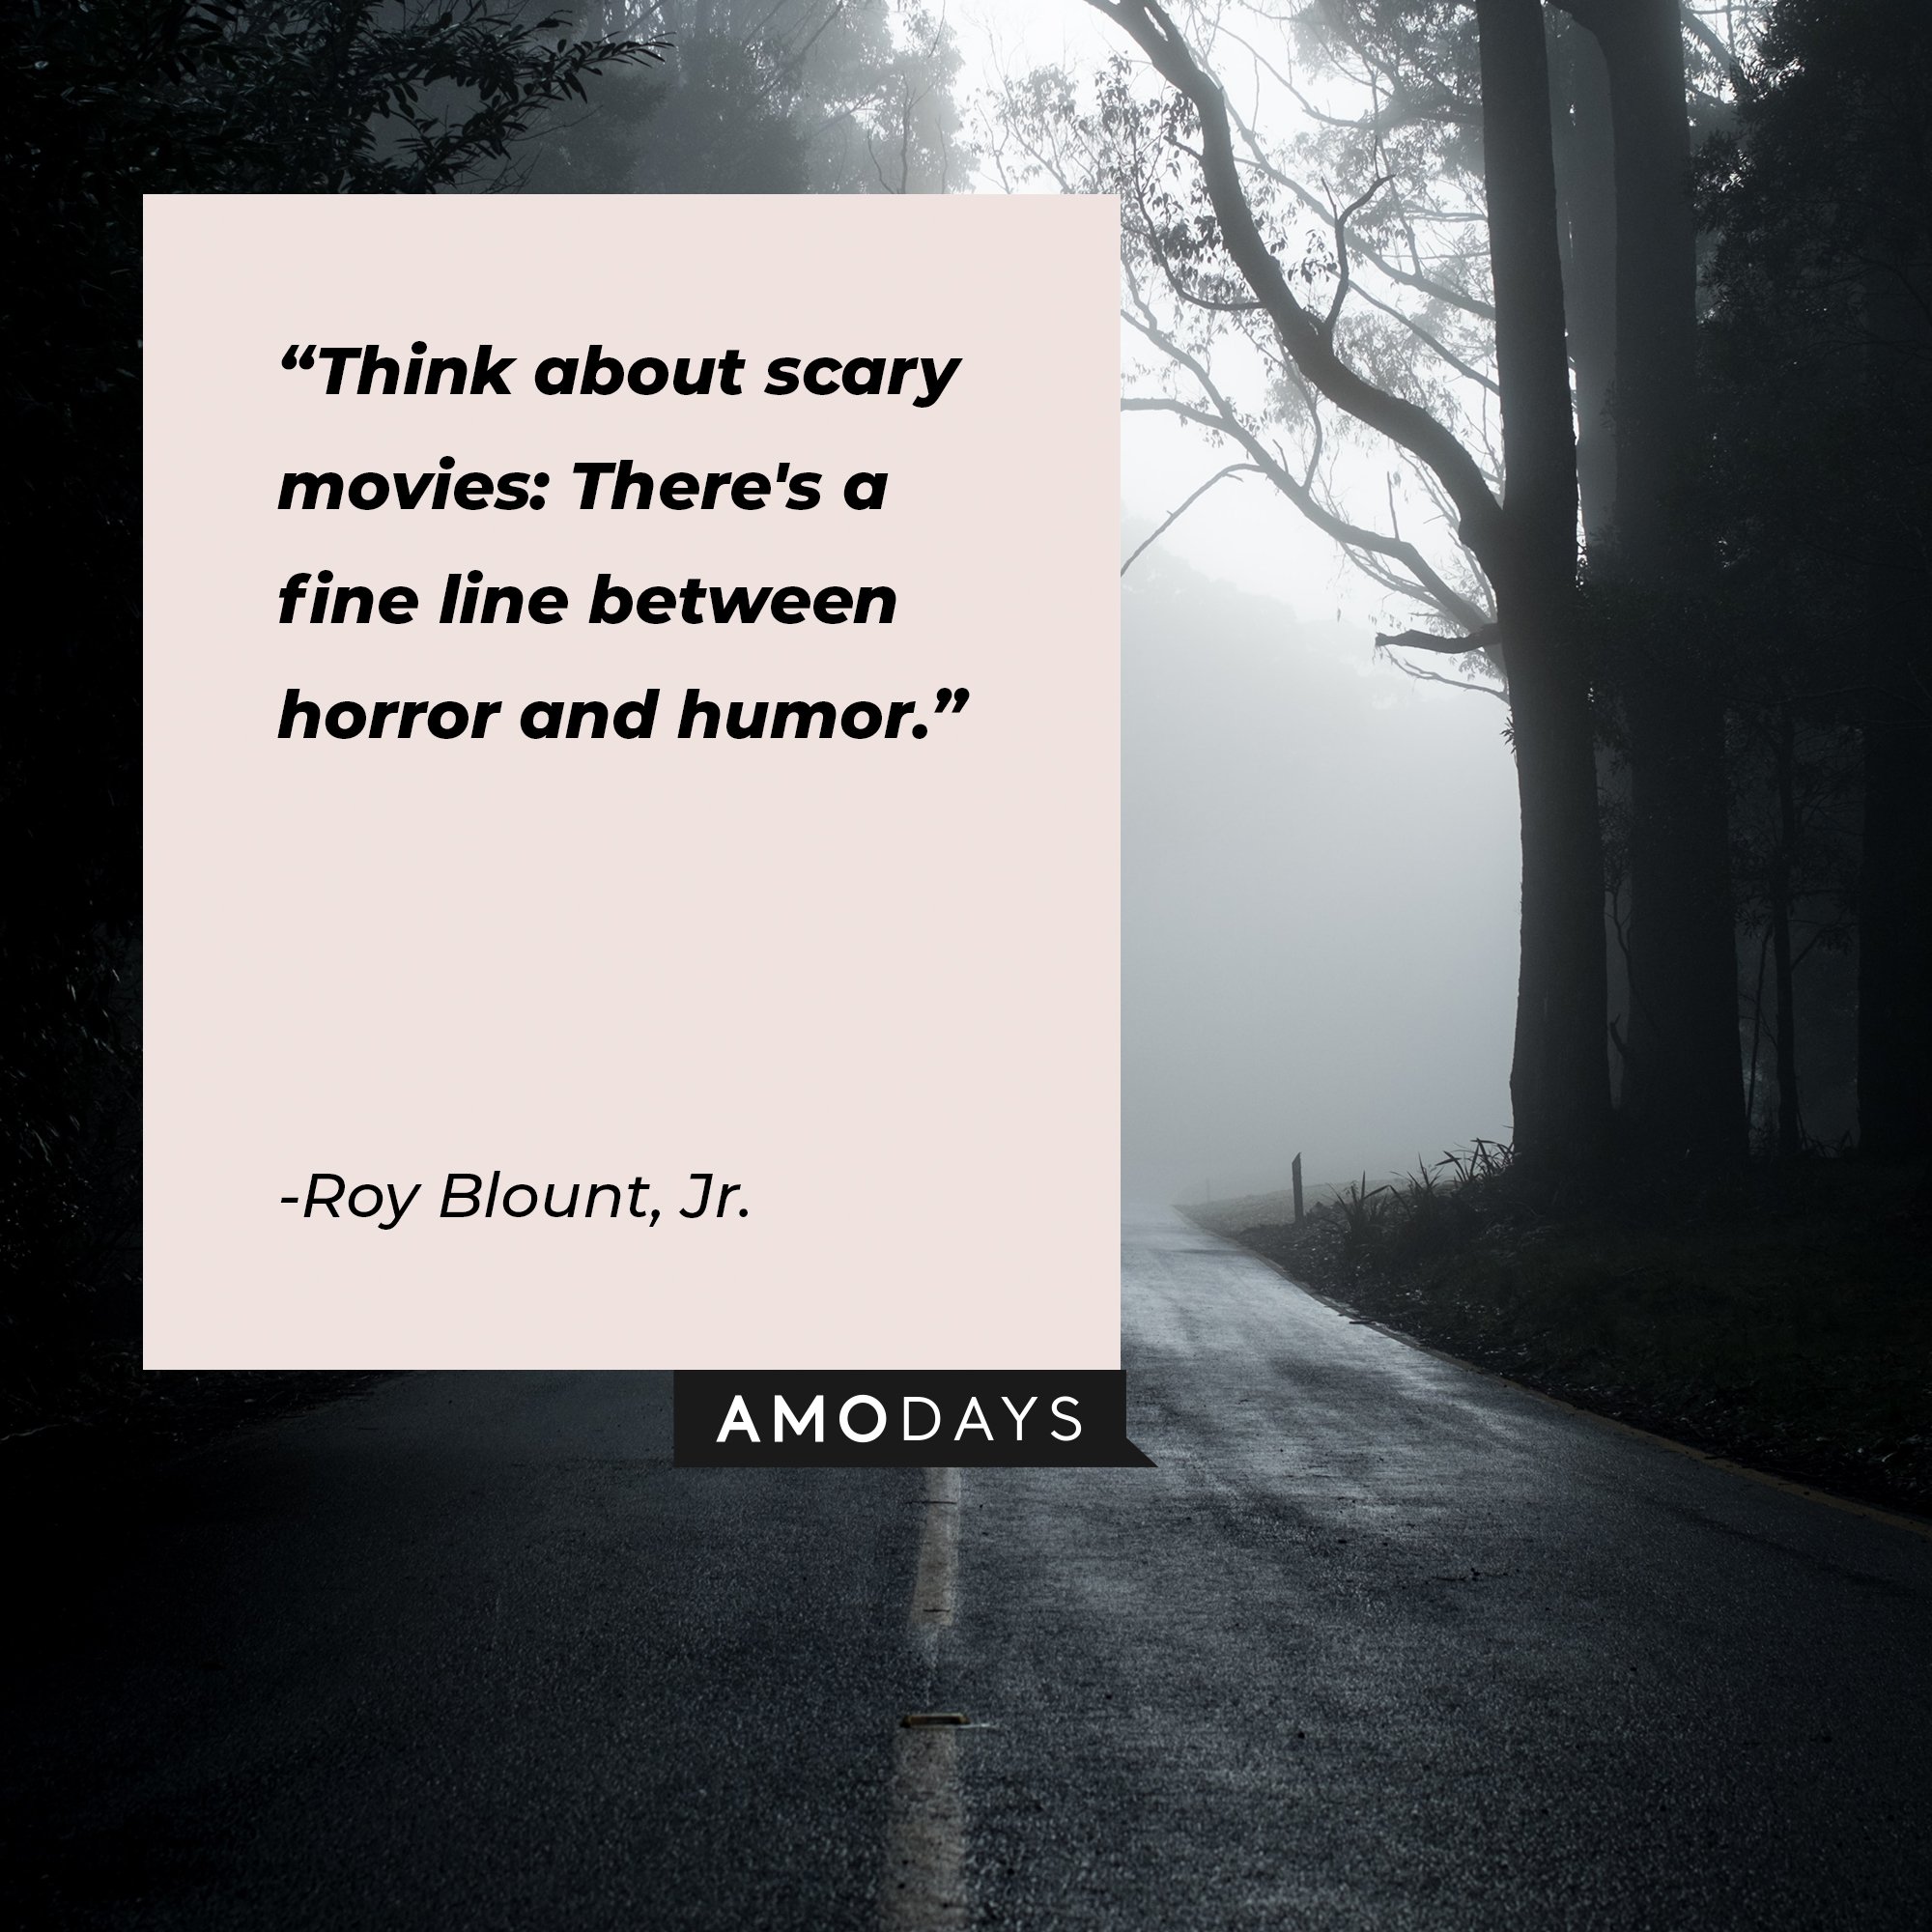 Roy Blount, Jr.’s quote: "Think about scary movies: There's a fine line between horror and humor." | Image: AmoDays